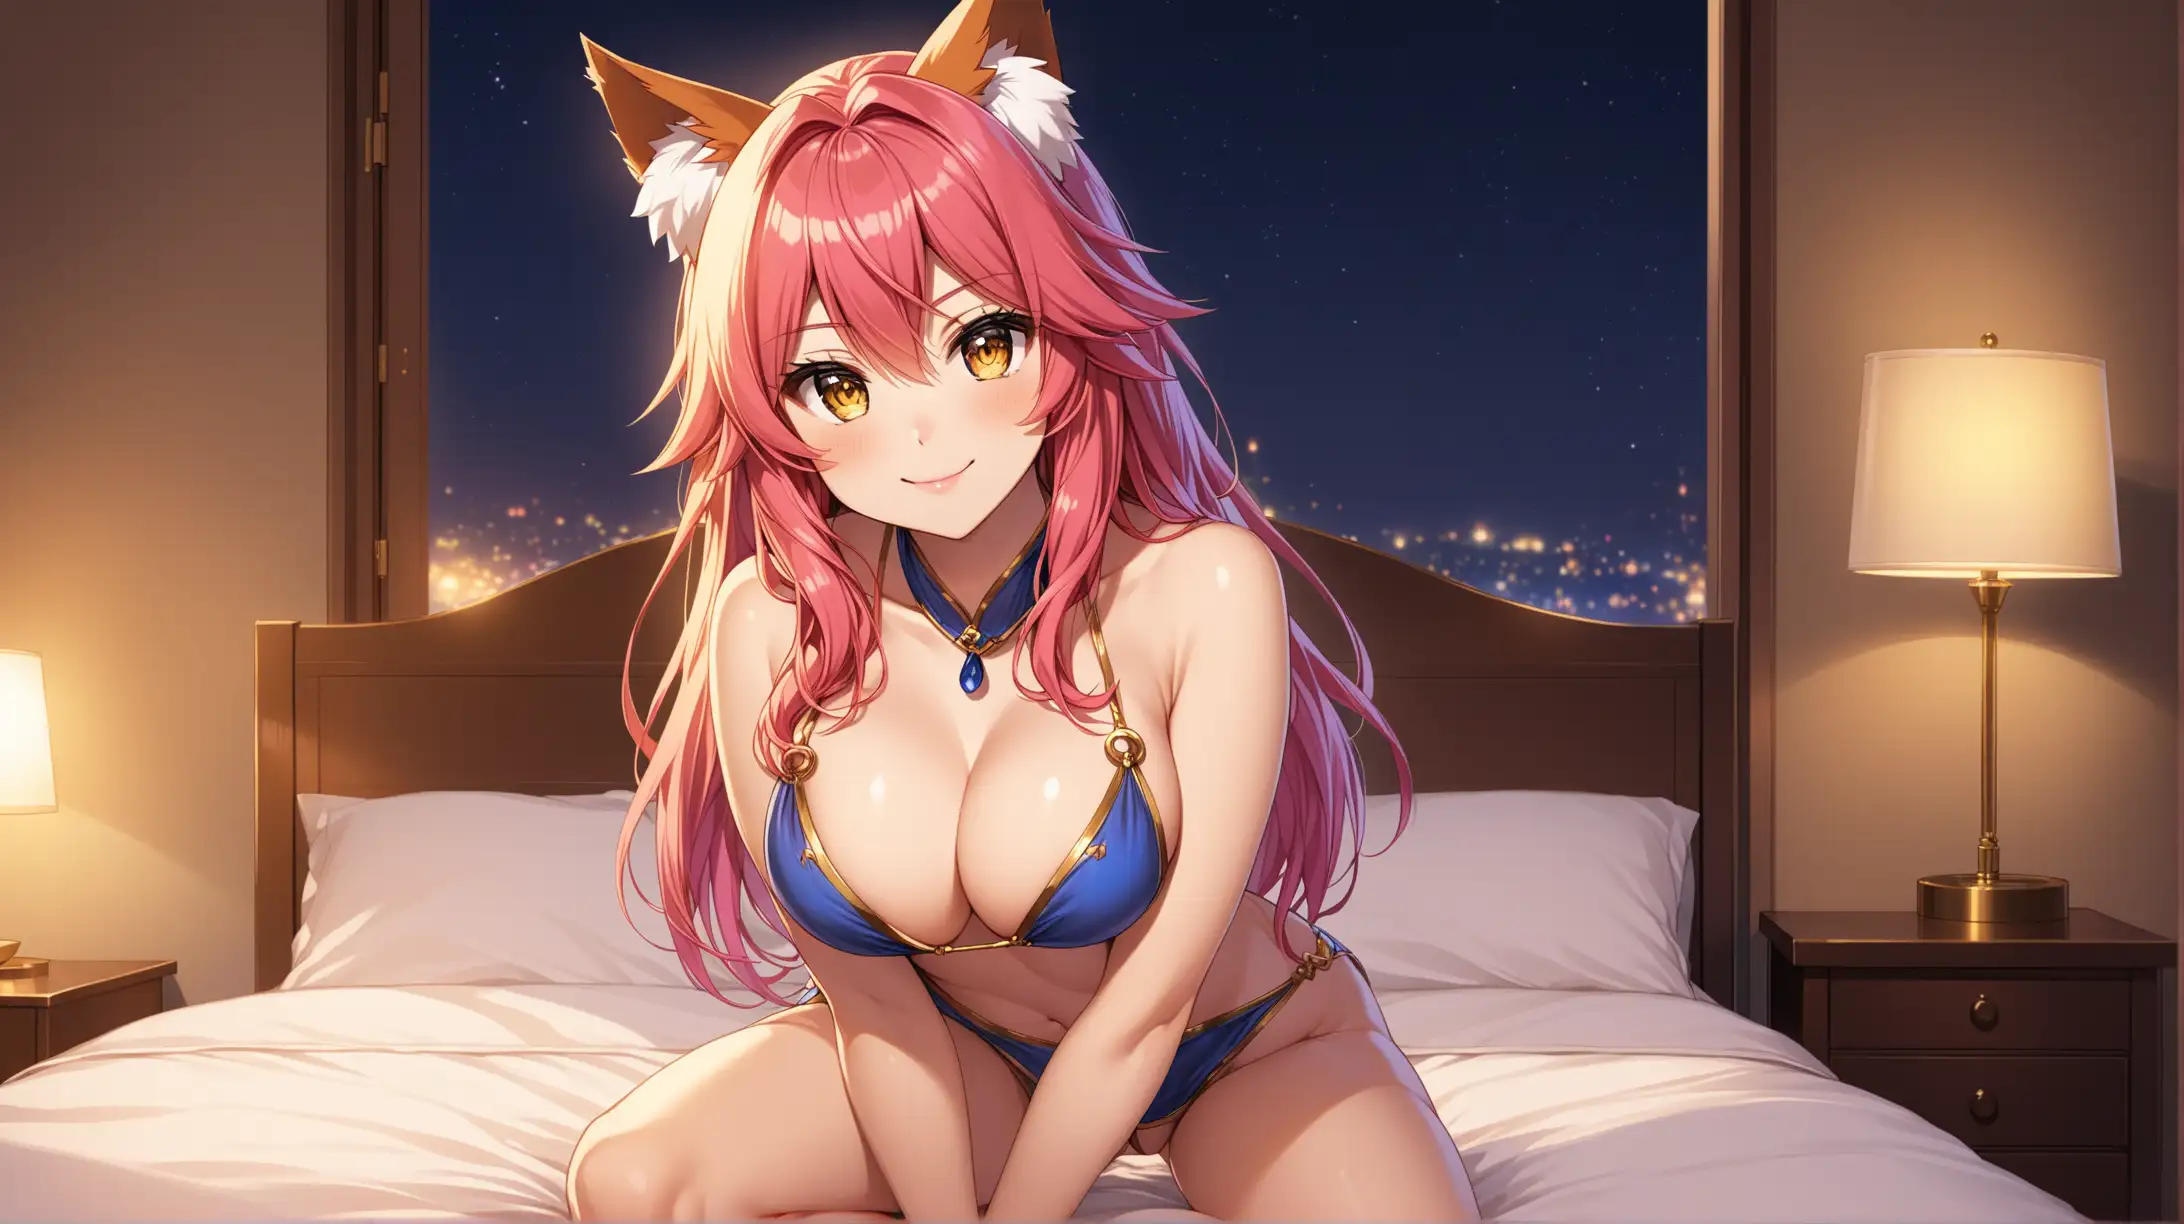 Tamamo no Mae Seductively Smiling in Colorful Revealing Attire in Dimly Lit Bedroom